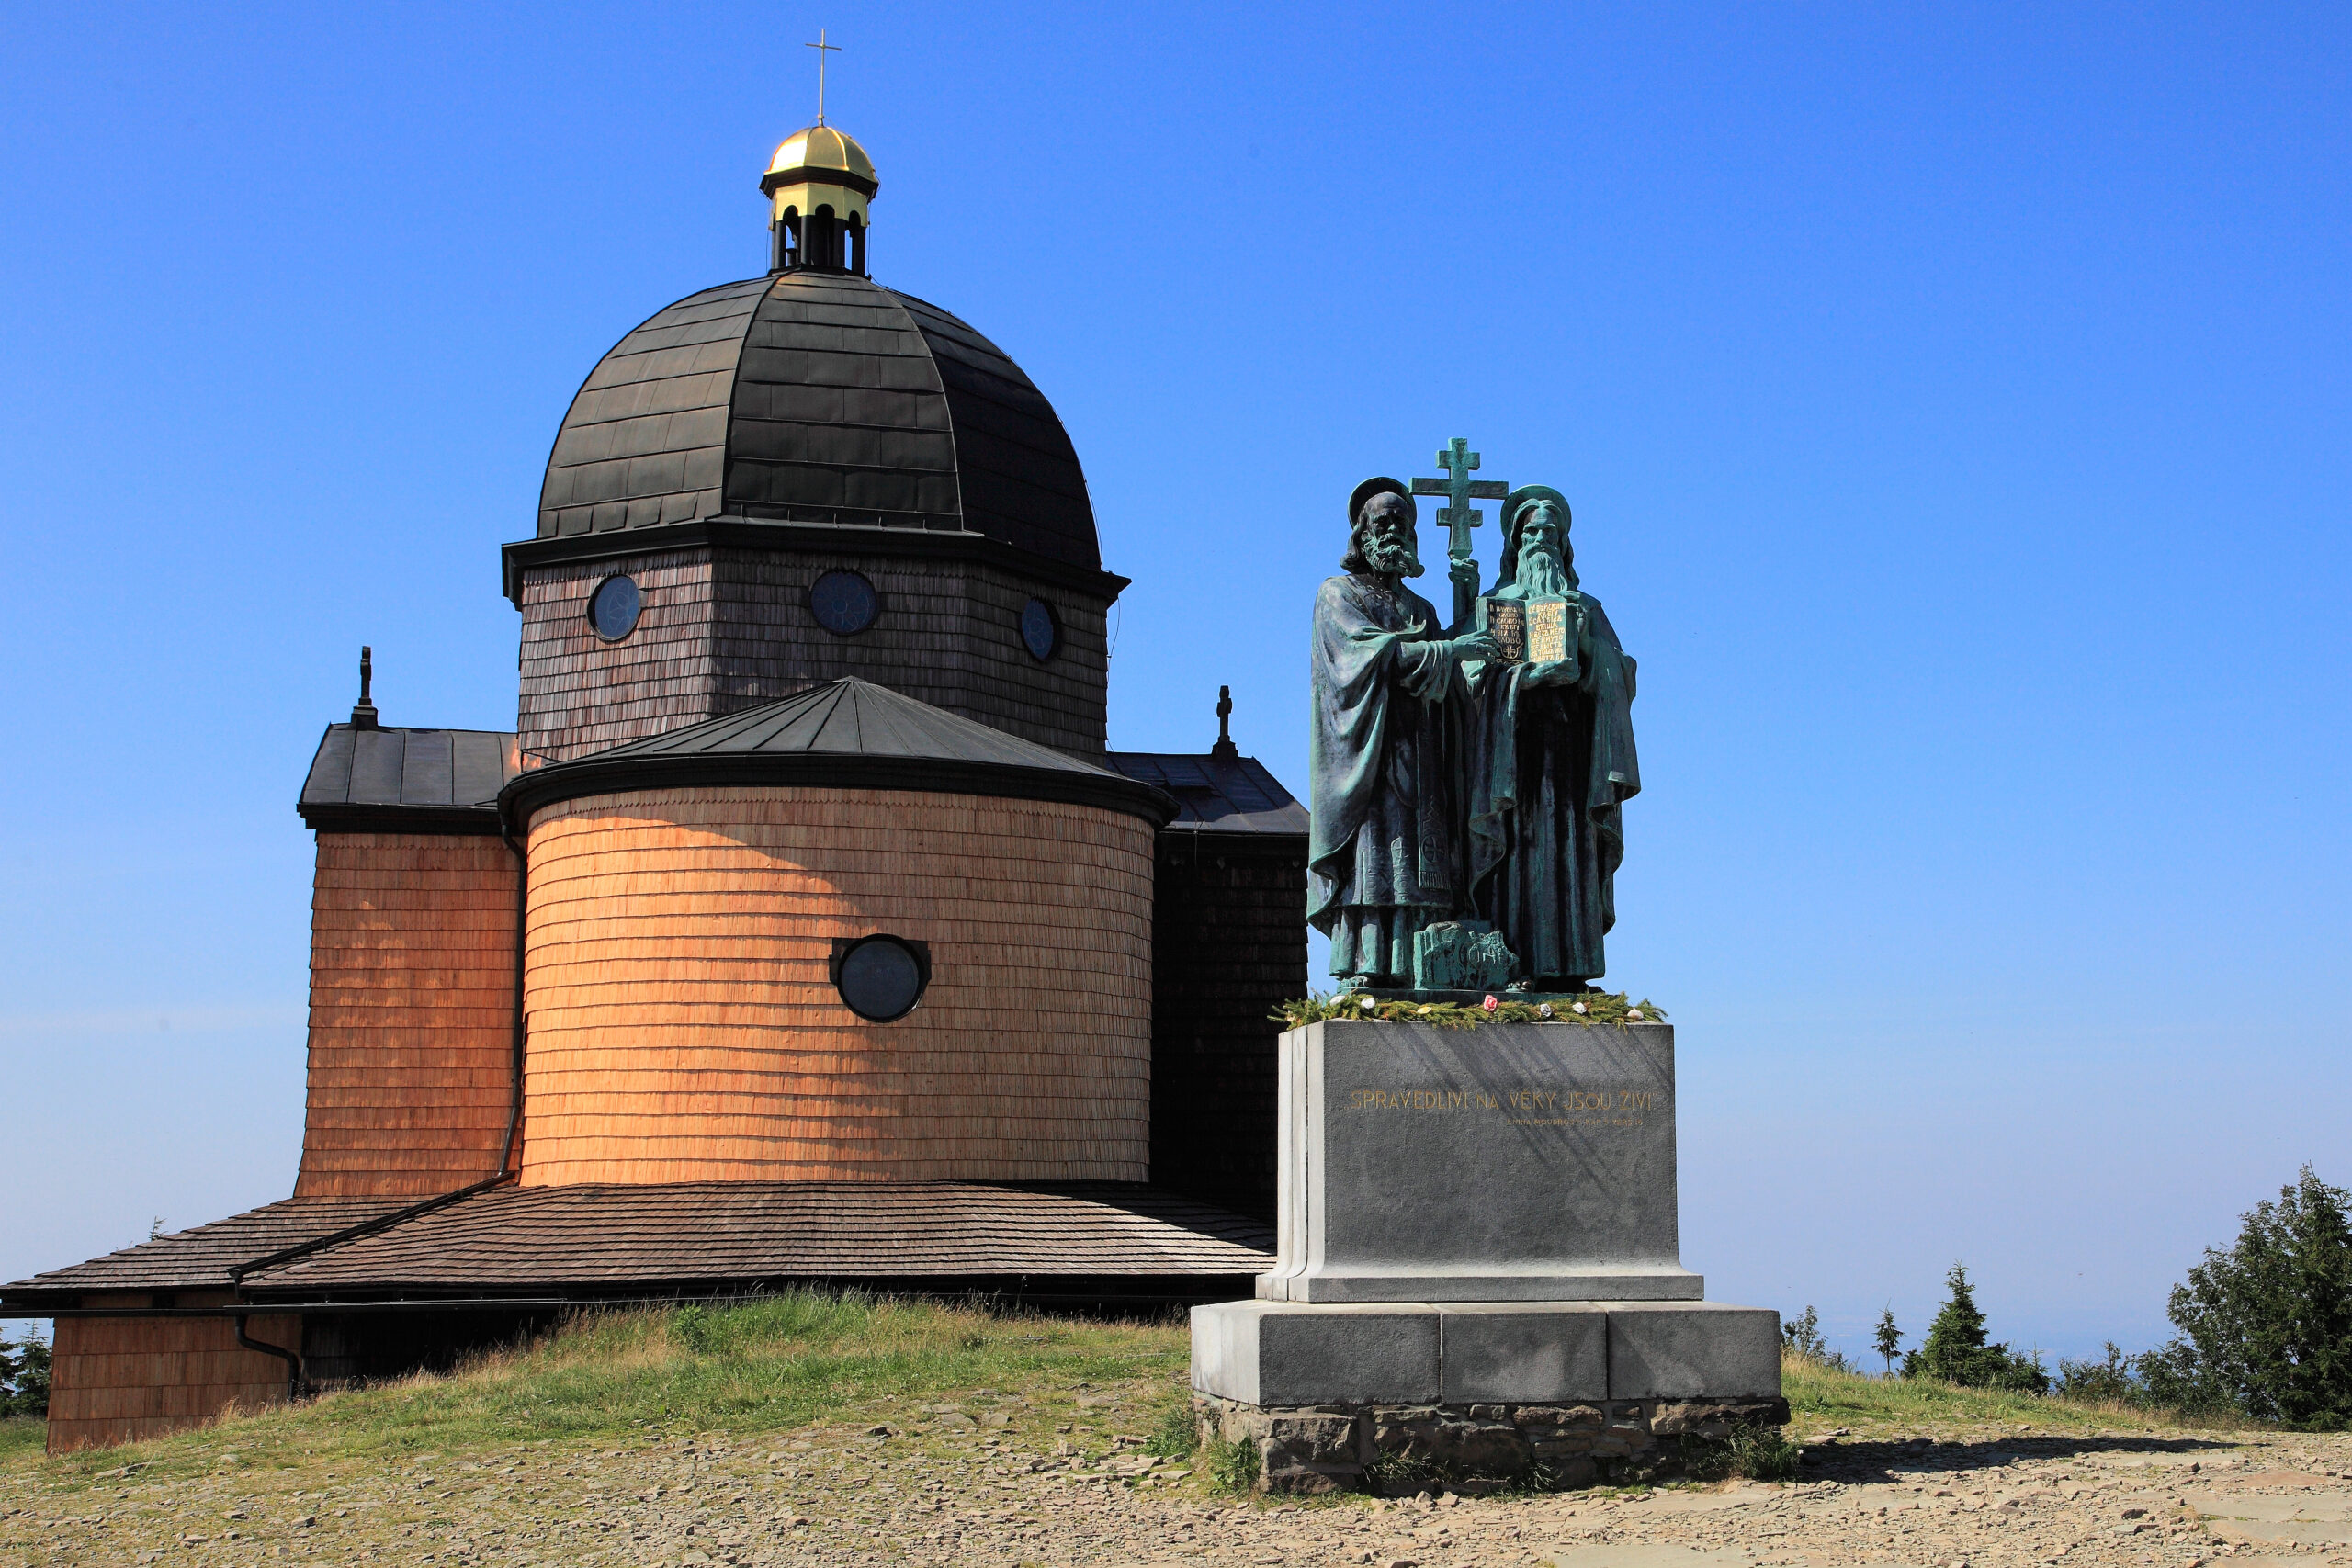 The Statue of Cyril and Methodius